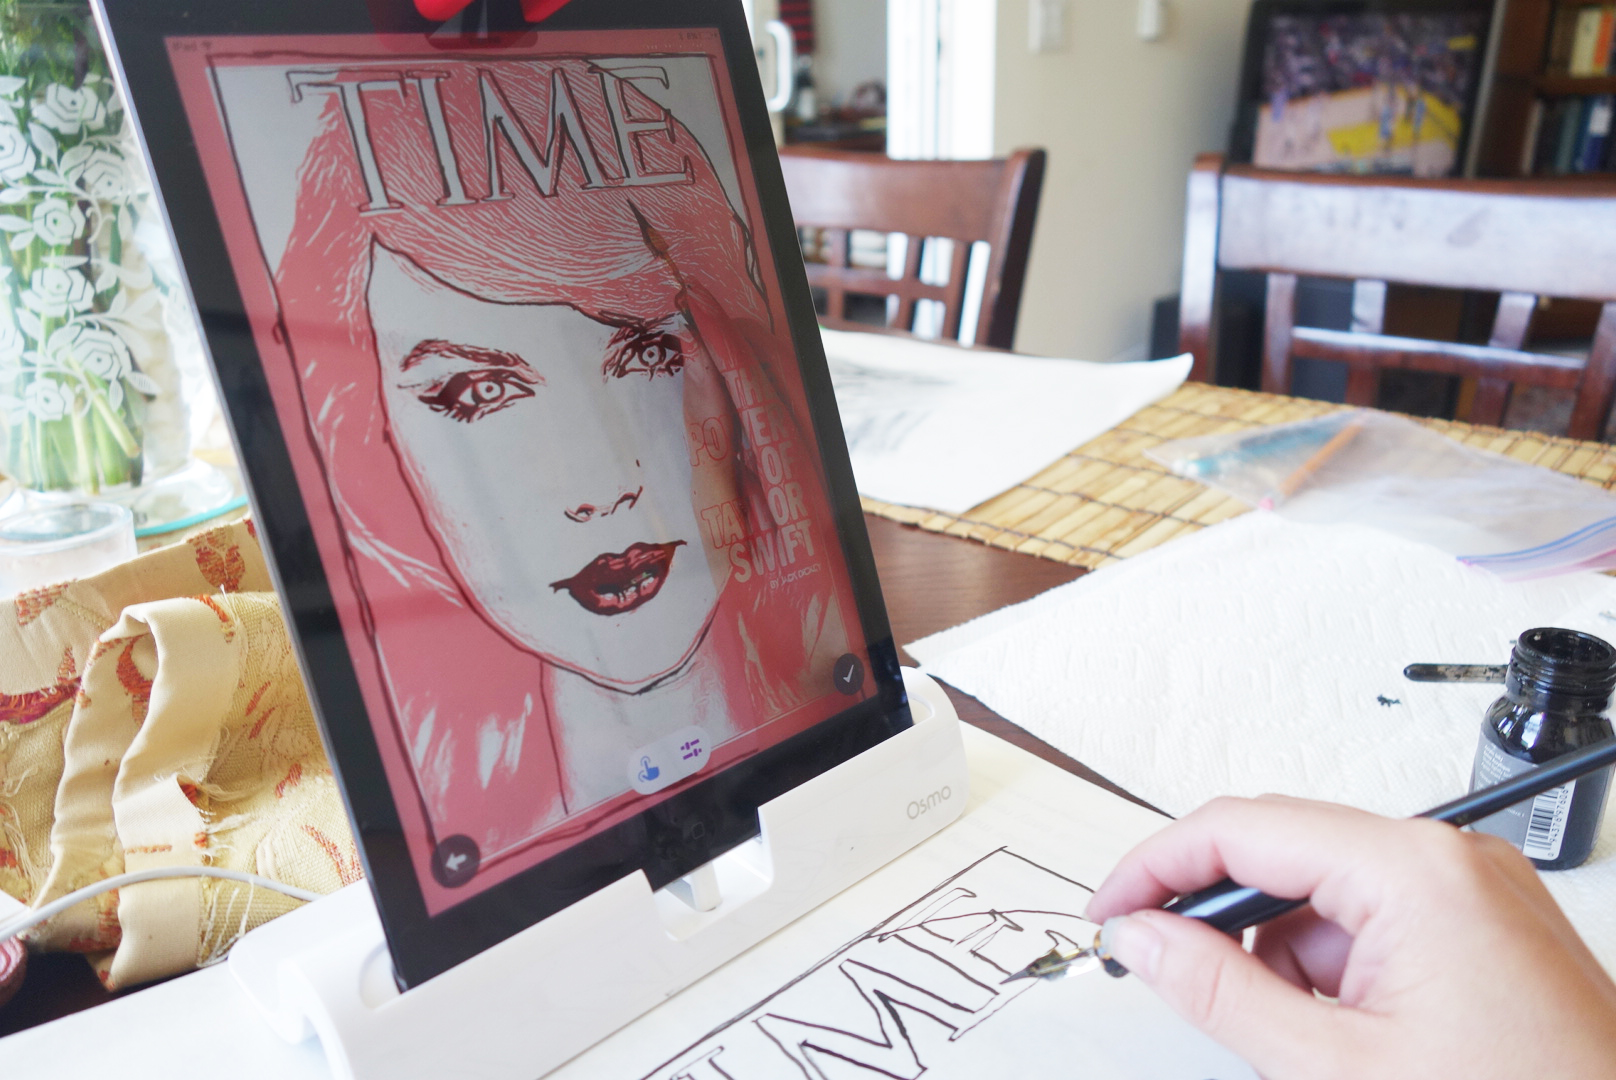 Osmo's Masterpiece app breaks down images into lines that the user can trace, watching their own hand move across the physical page on the tablet's screen. Photo by Katy Steinmetz for TIME (Katy Steinmetz for TIME)